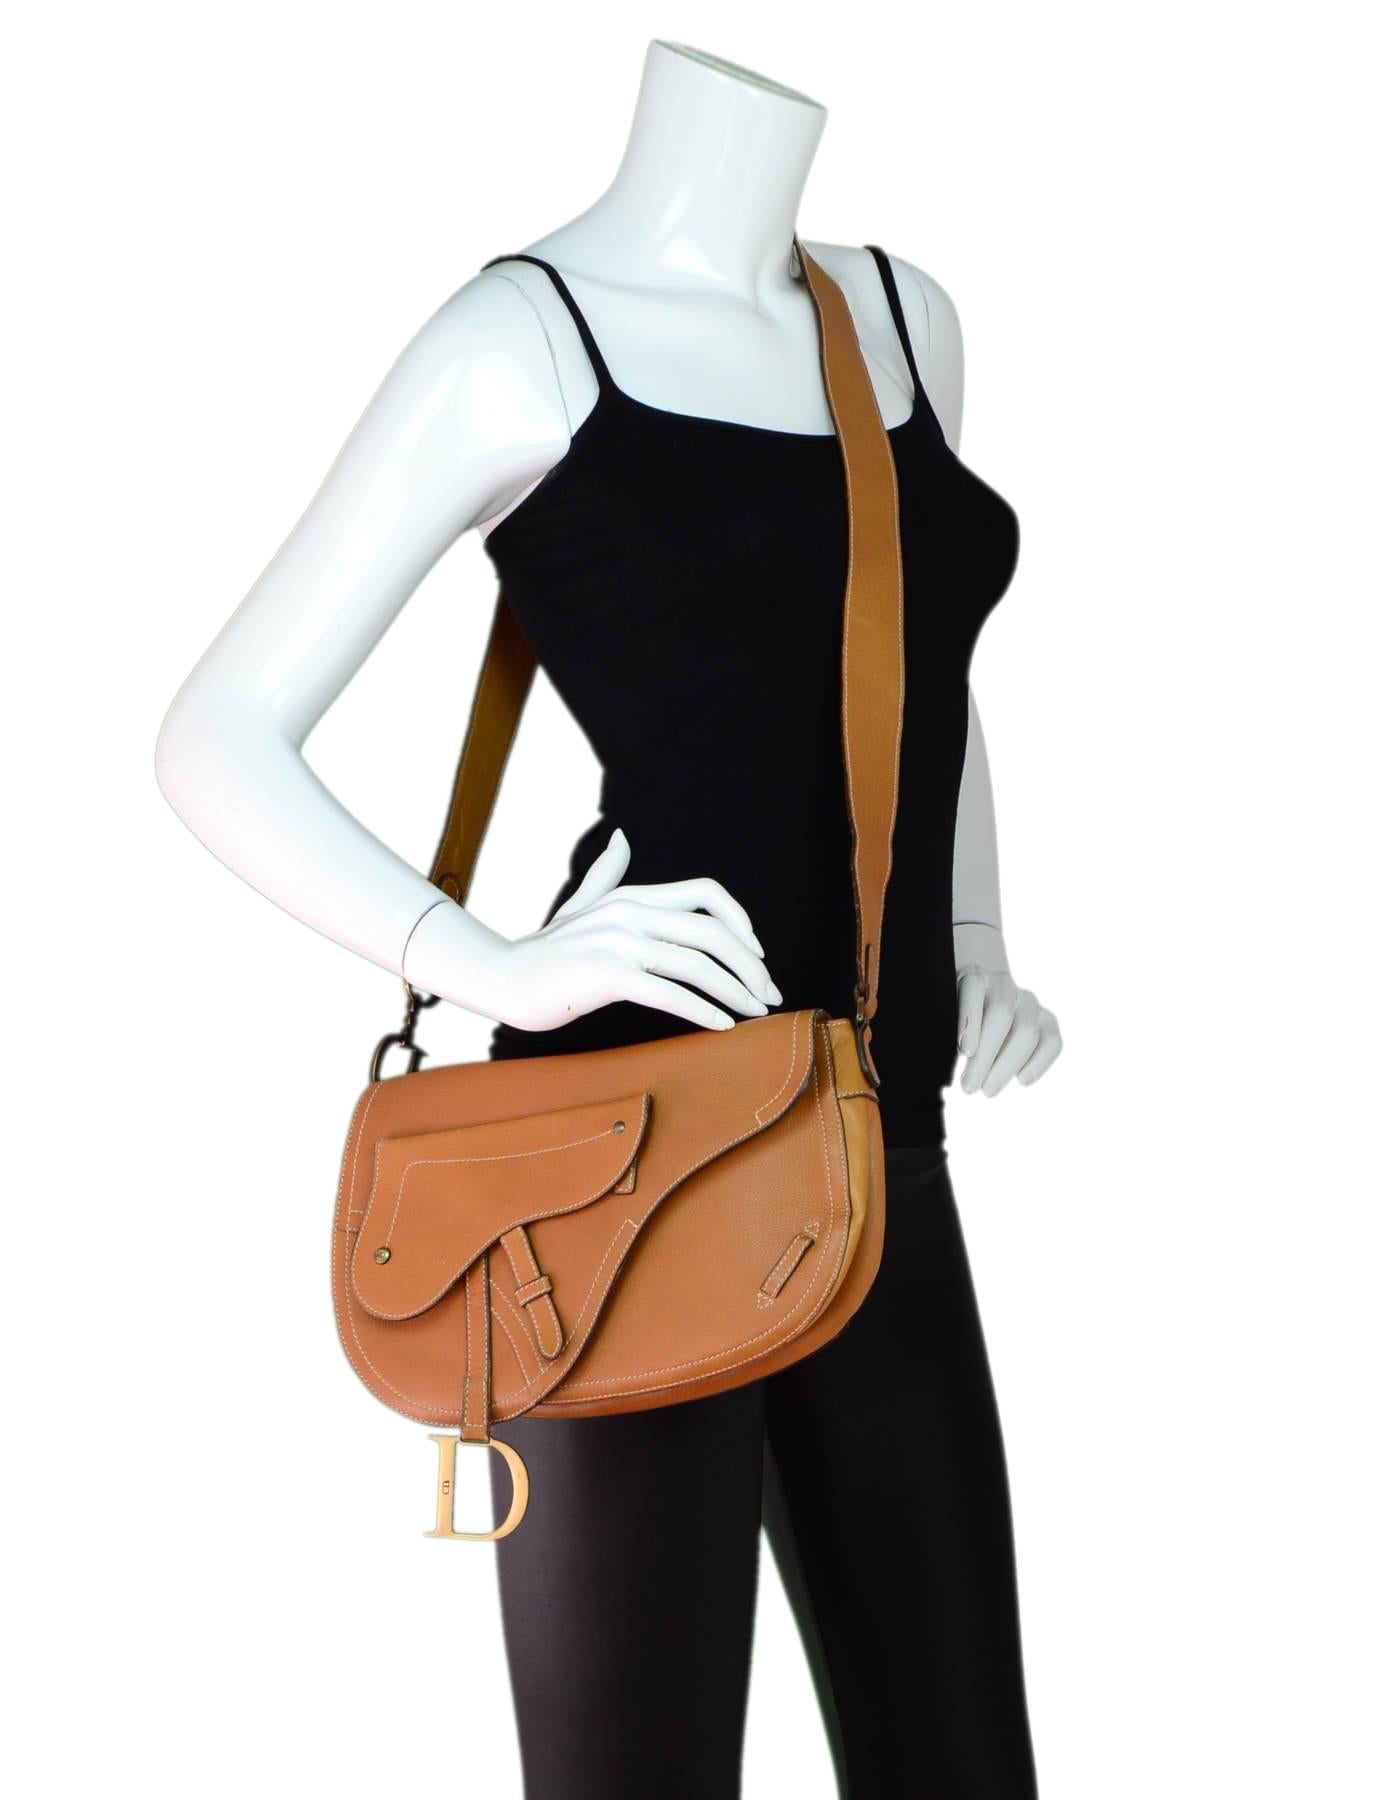 Christian Tan Leather D Buckle Messenger Saddle Bag

Made In: Italy
Color: Tan
Hardware: Goldtone
Materials: Leather, metal
Lining: Brown textile
Closure/Opening: Flap top with snap closure
Exterior Pockets: Small pocket at front and wall pocket at